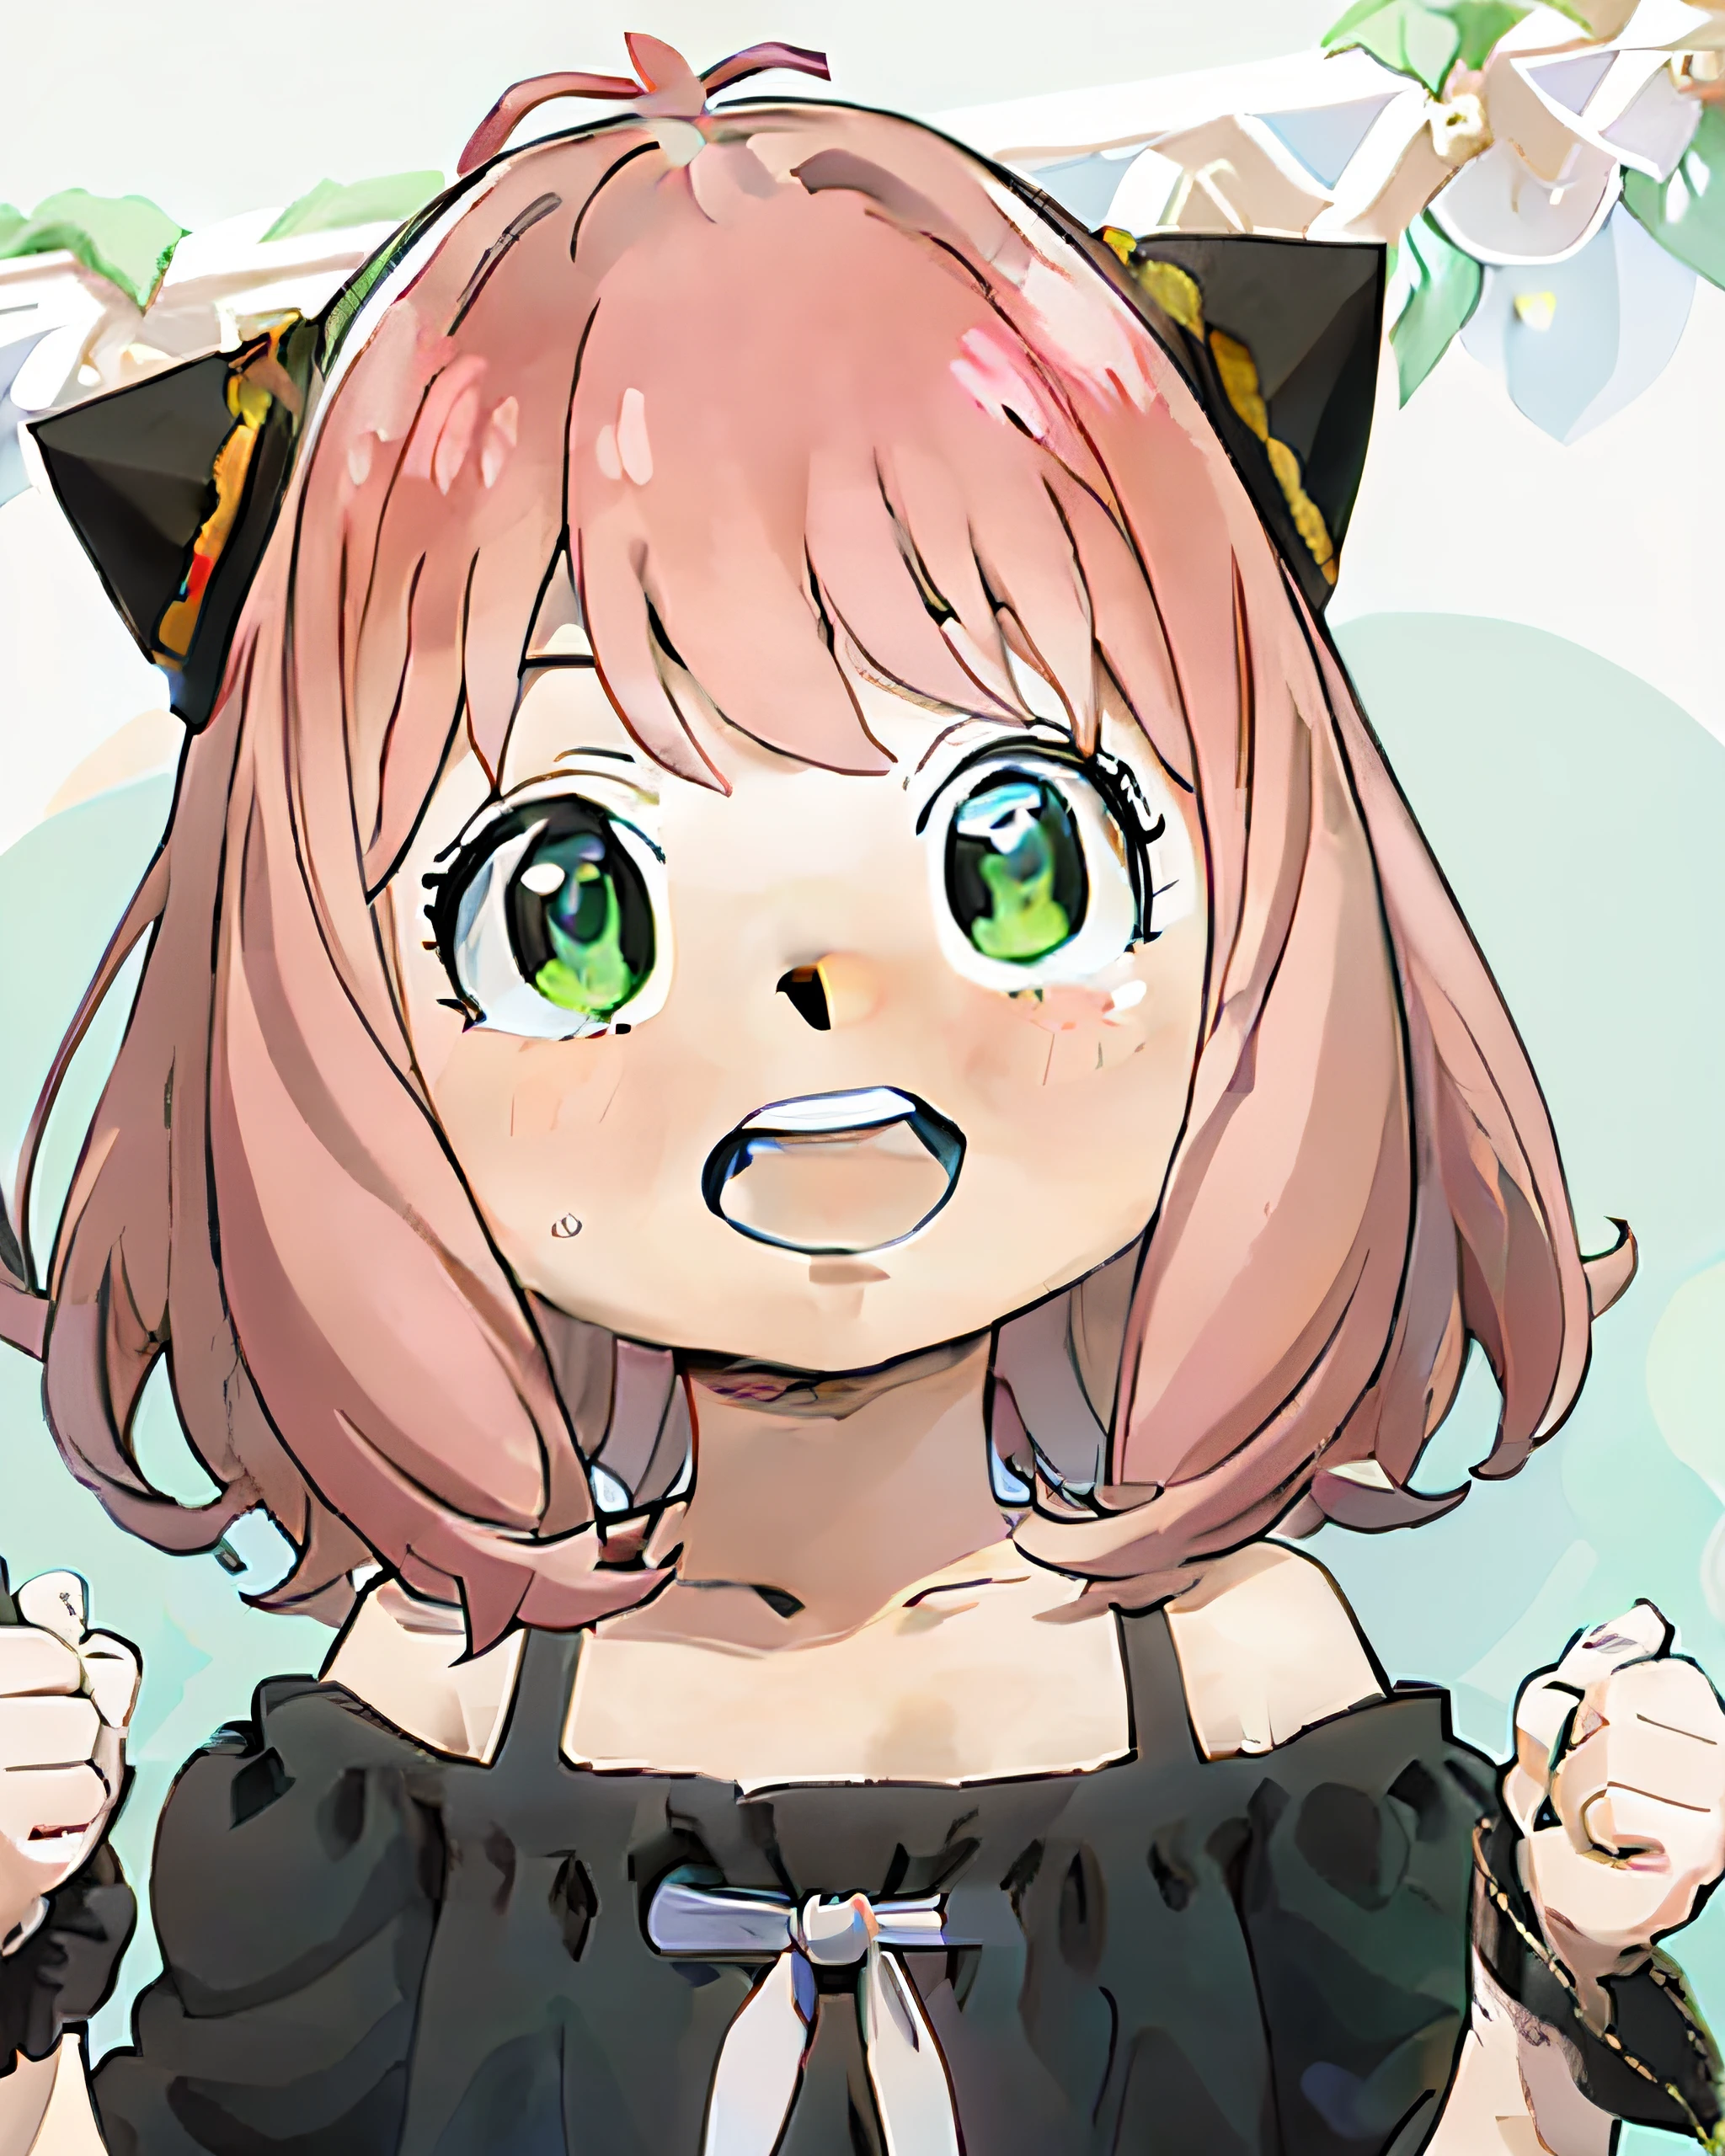 a anime girl with 粉紅色的頭髮 and 綠眼睛 pointing at something with a surprised look on her face and a black cat hat, (1個女孩:0.992), (:d:0.583), (瀏海:0.701), (臉紅:0.584), (綠眼睛:0.992), (看著觀眾:0.711), (張開嘴:0.760), (粉紅色的頭髮:0.917), (絲帶:0.826), (短髮:0.571), (微笑:0.855), (獨自的:0.949), (牙齒:0.770), (上半身:0.760)